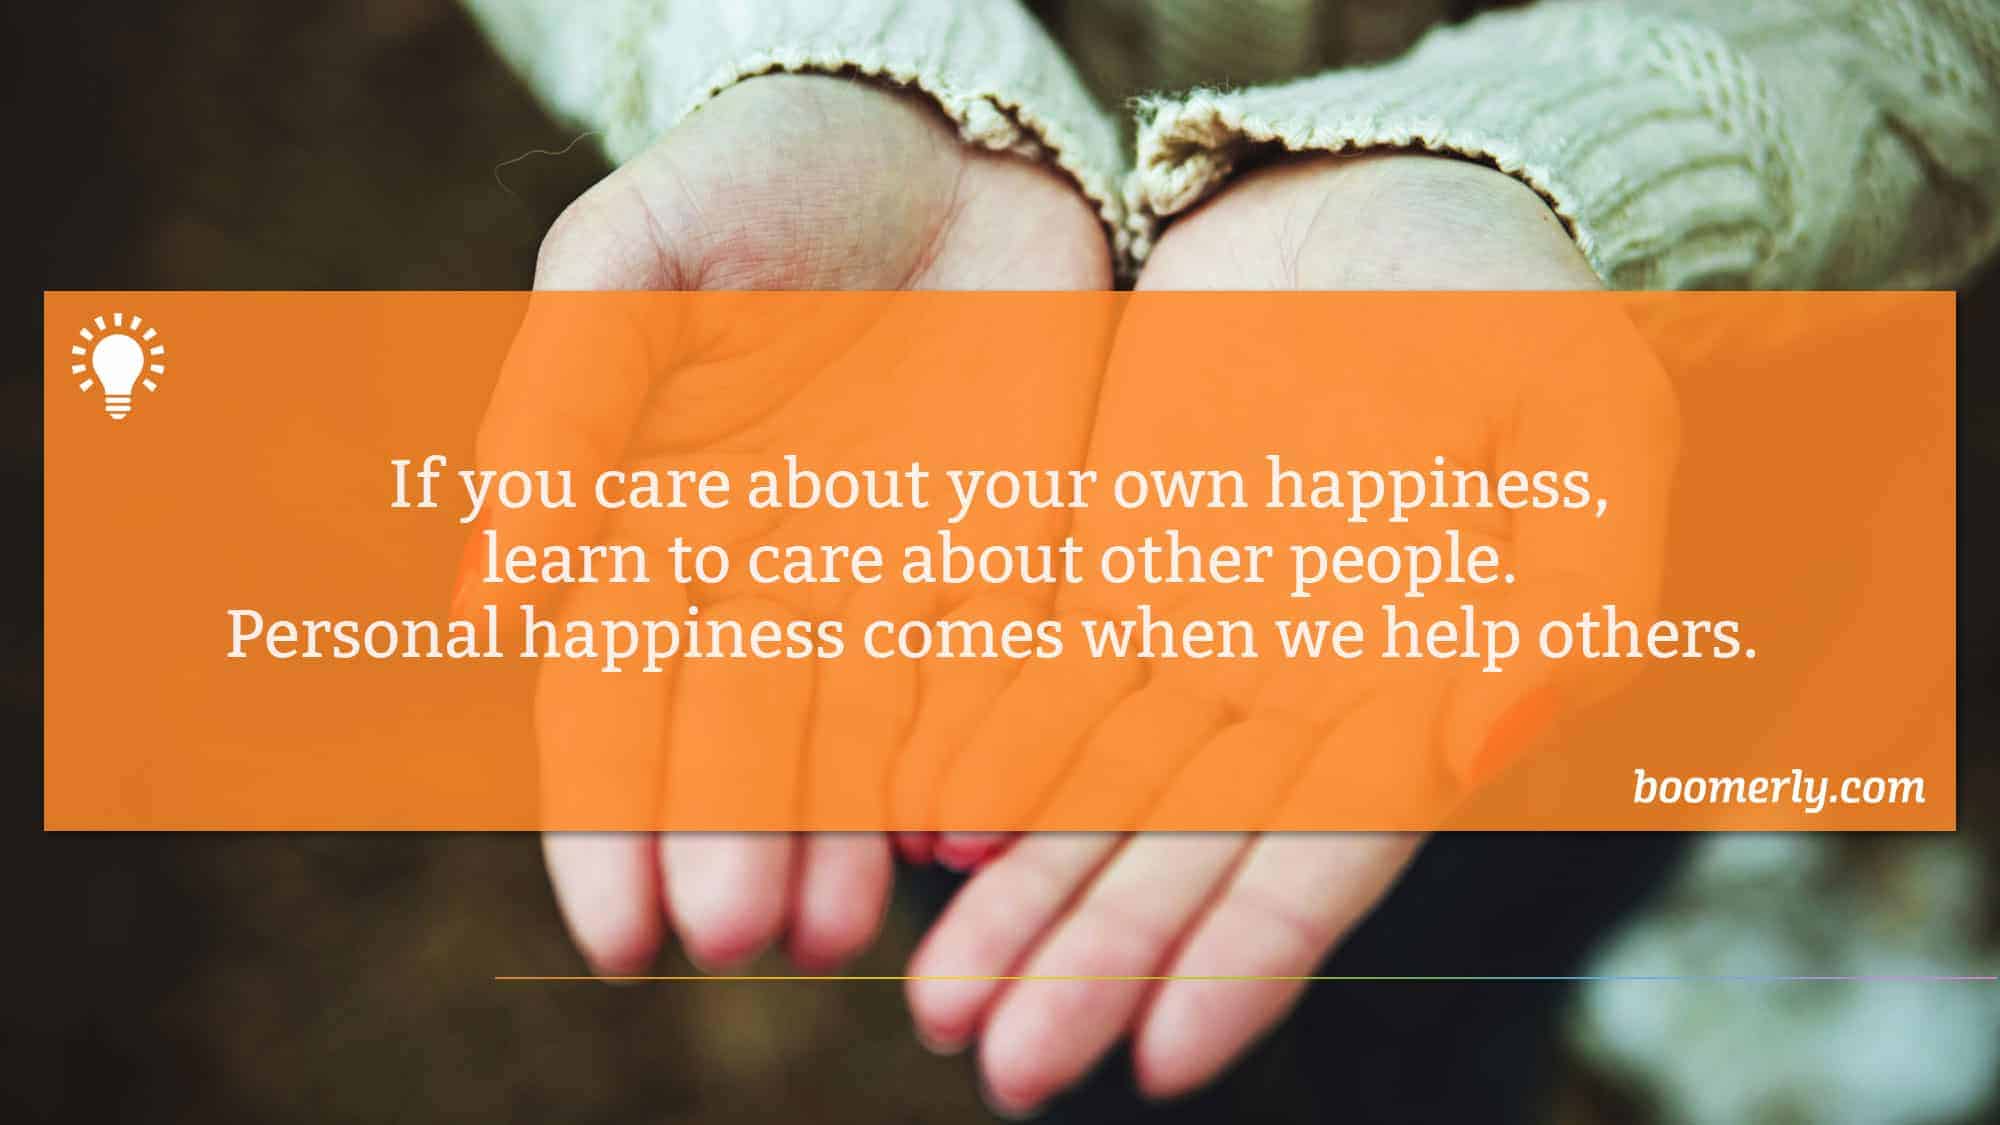 If you care about your own happiness, learn to care about other people. Personal happiness comes when we help others. 